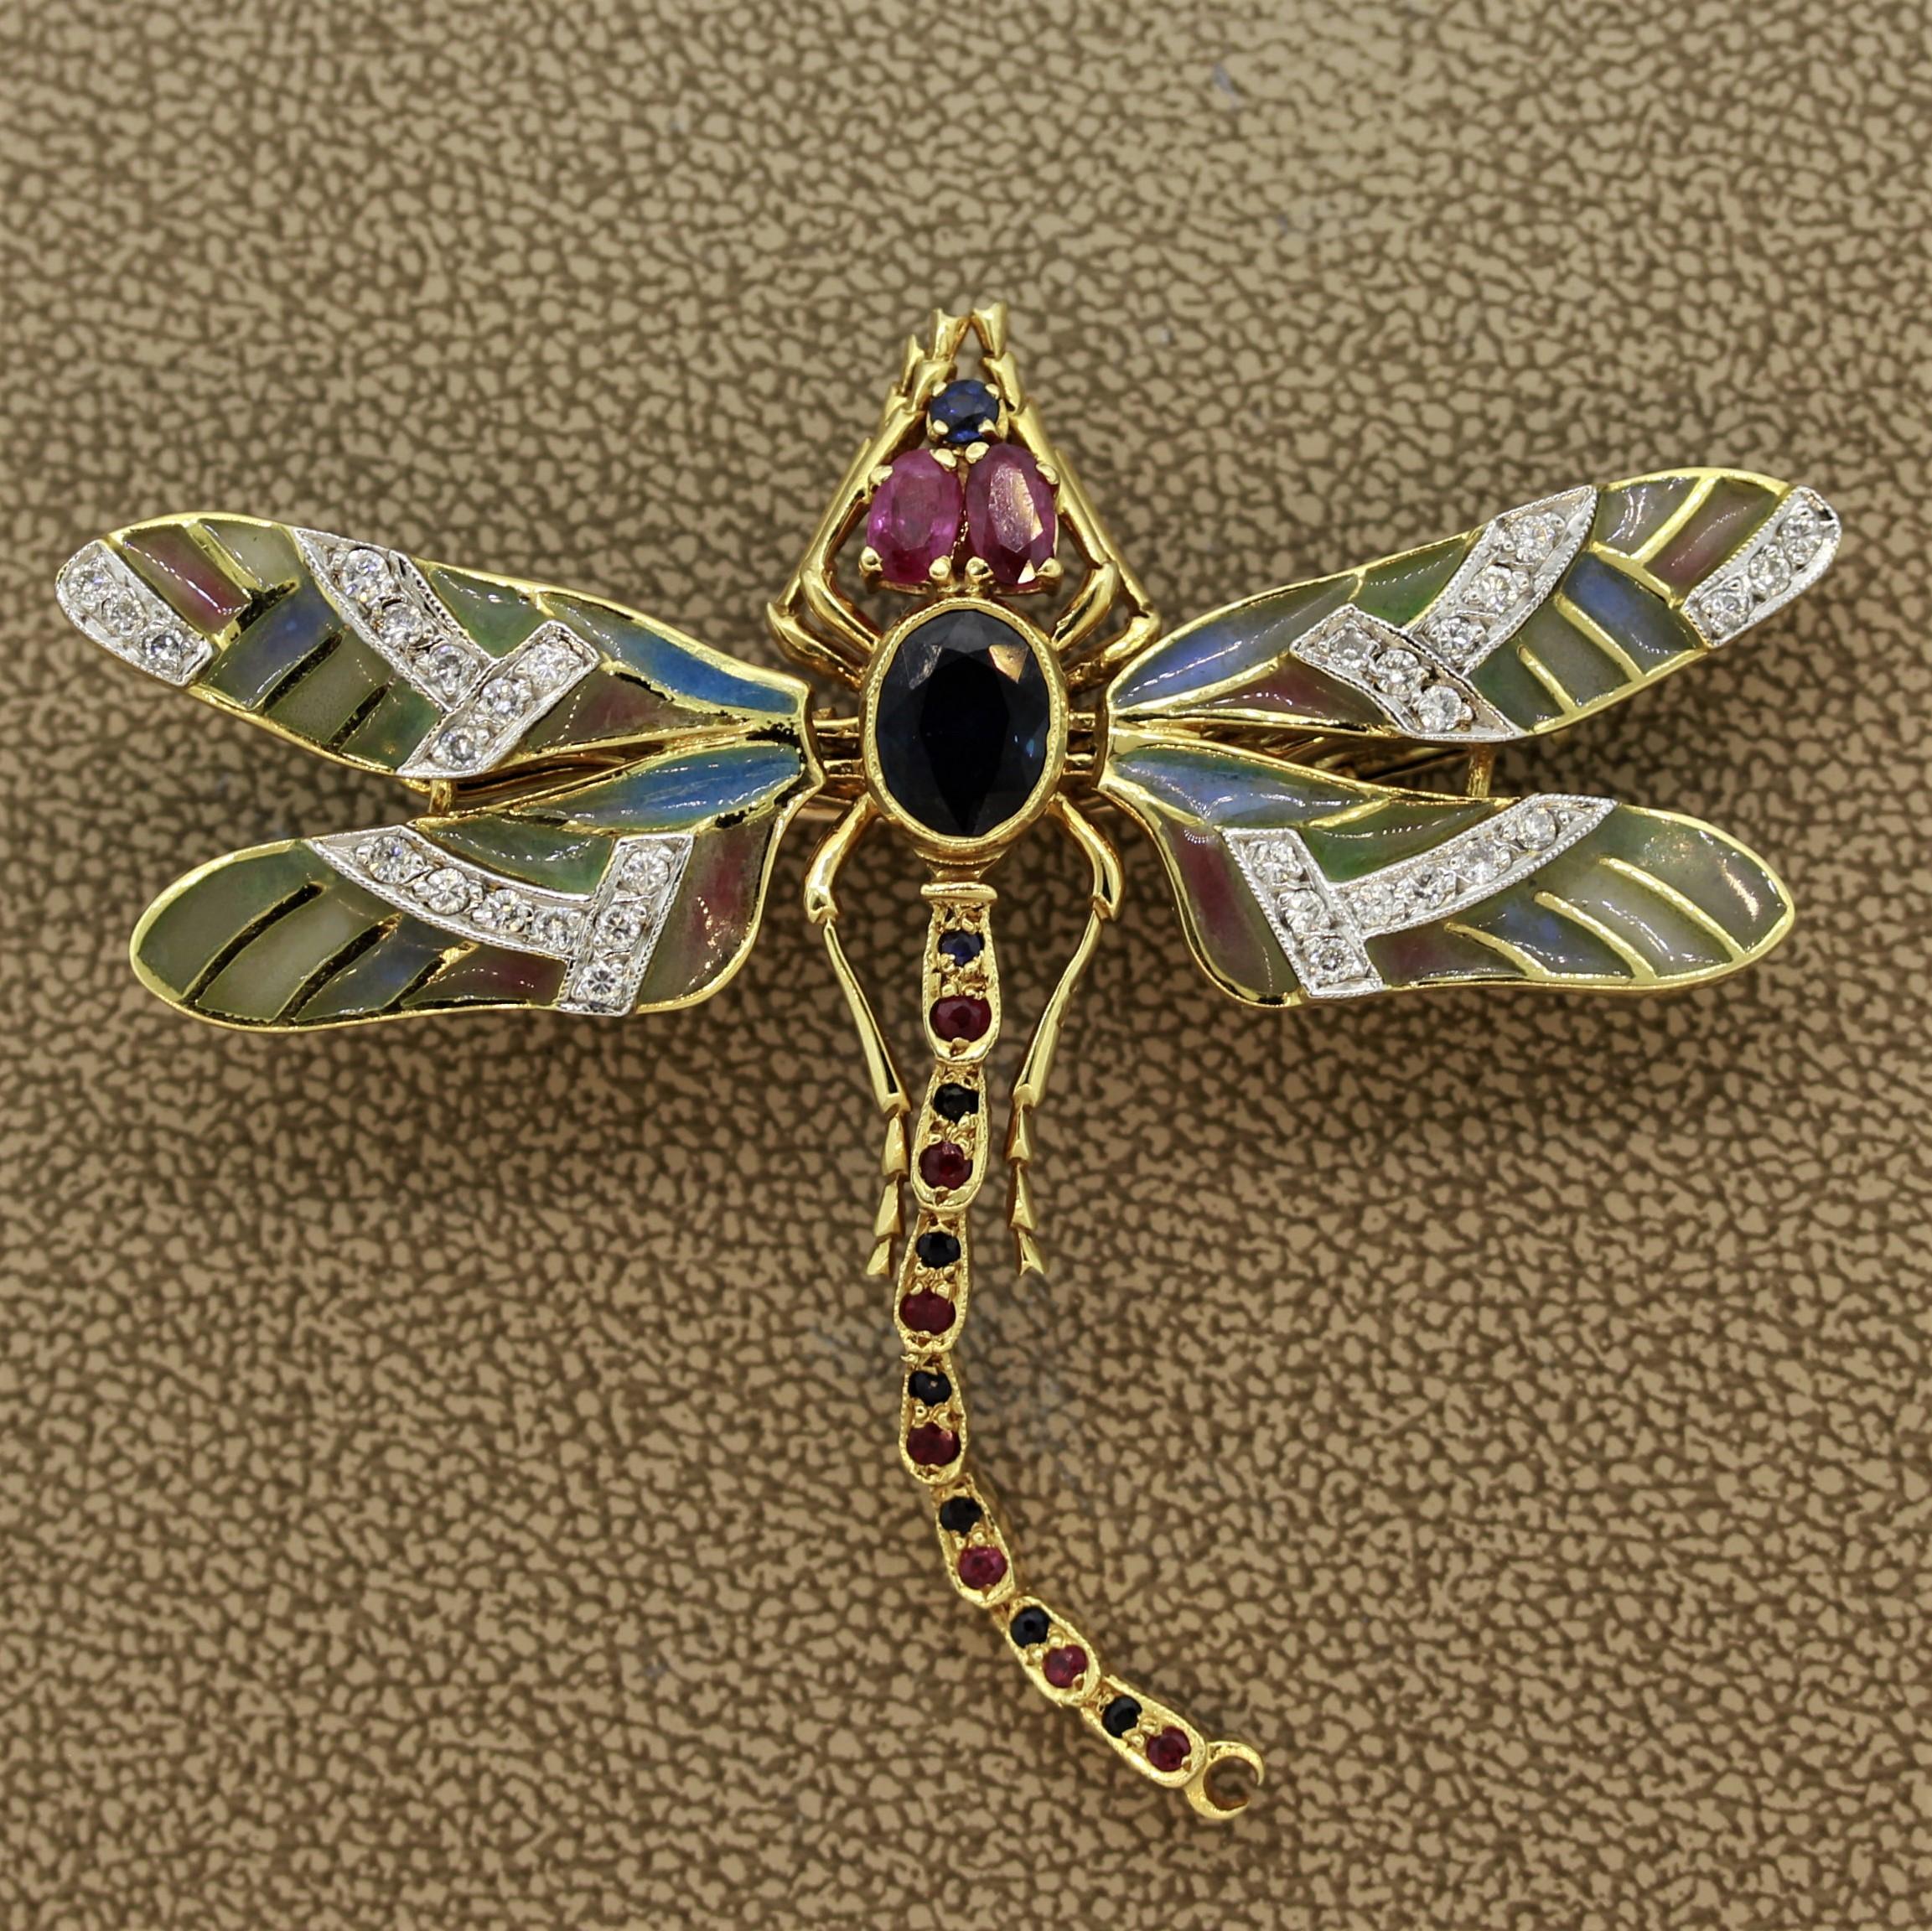 A unique dragonfly brooch. It features enameled Plique-a-Jour wings, which are enamel without a backing making a “window” allowing light to pass. Adding to that are round brilliant cut diamonds set on the wings. Sapphires and rubies decorate and